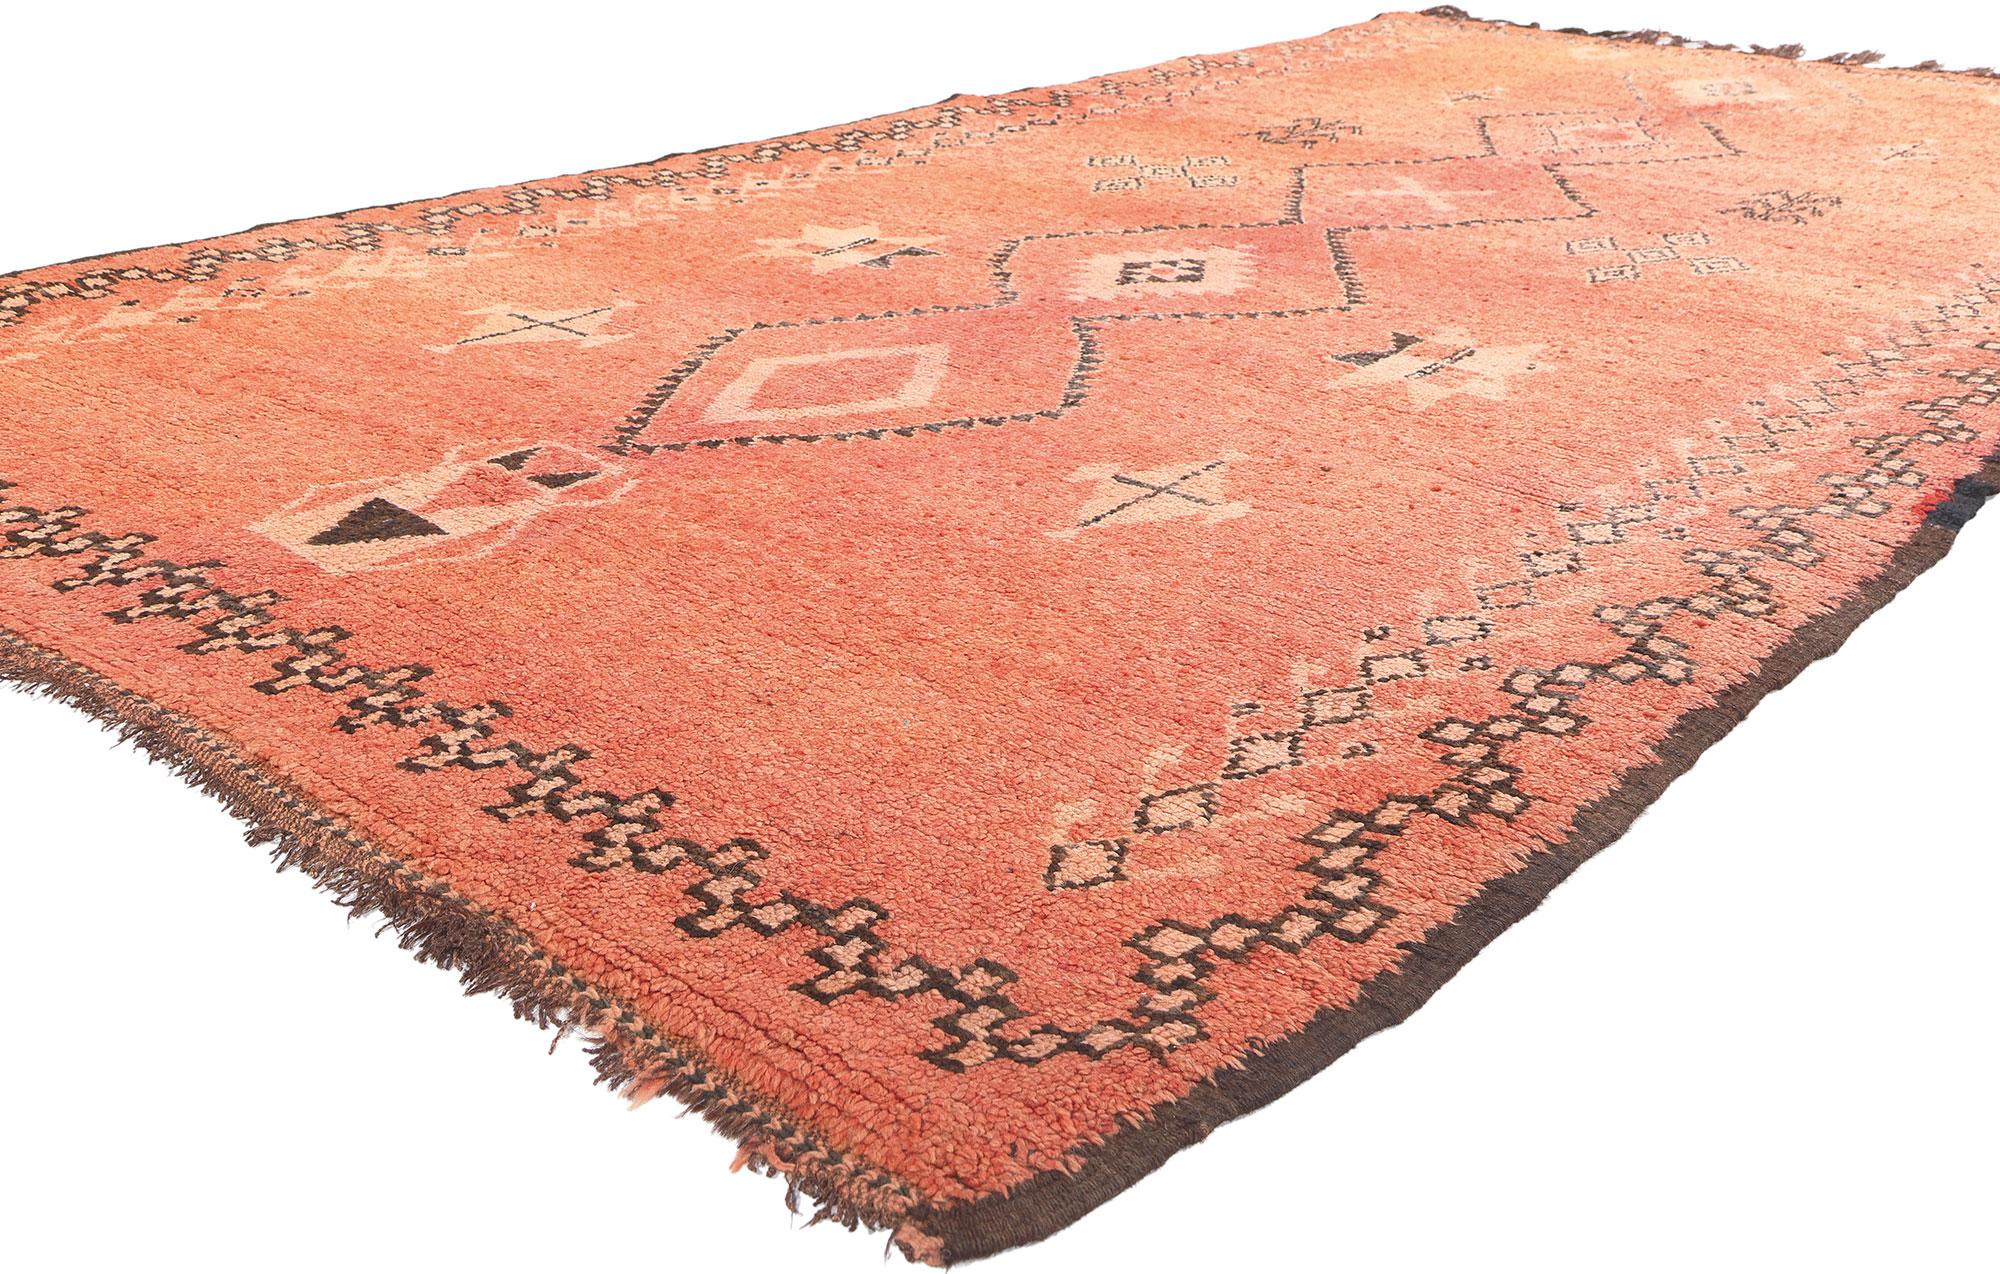 20323 Vintage Orange Taznakht Moroccan Rug, 05'11 x 11'08.
Embark on a journey into the rich legacy of the Taznakht Tribe, where skilled hands in the High Atlas Mountains of southern Morocco wove this hand-knotted wool vintage Berber Moroccan rug—an